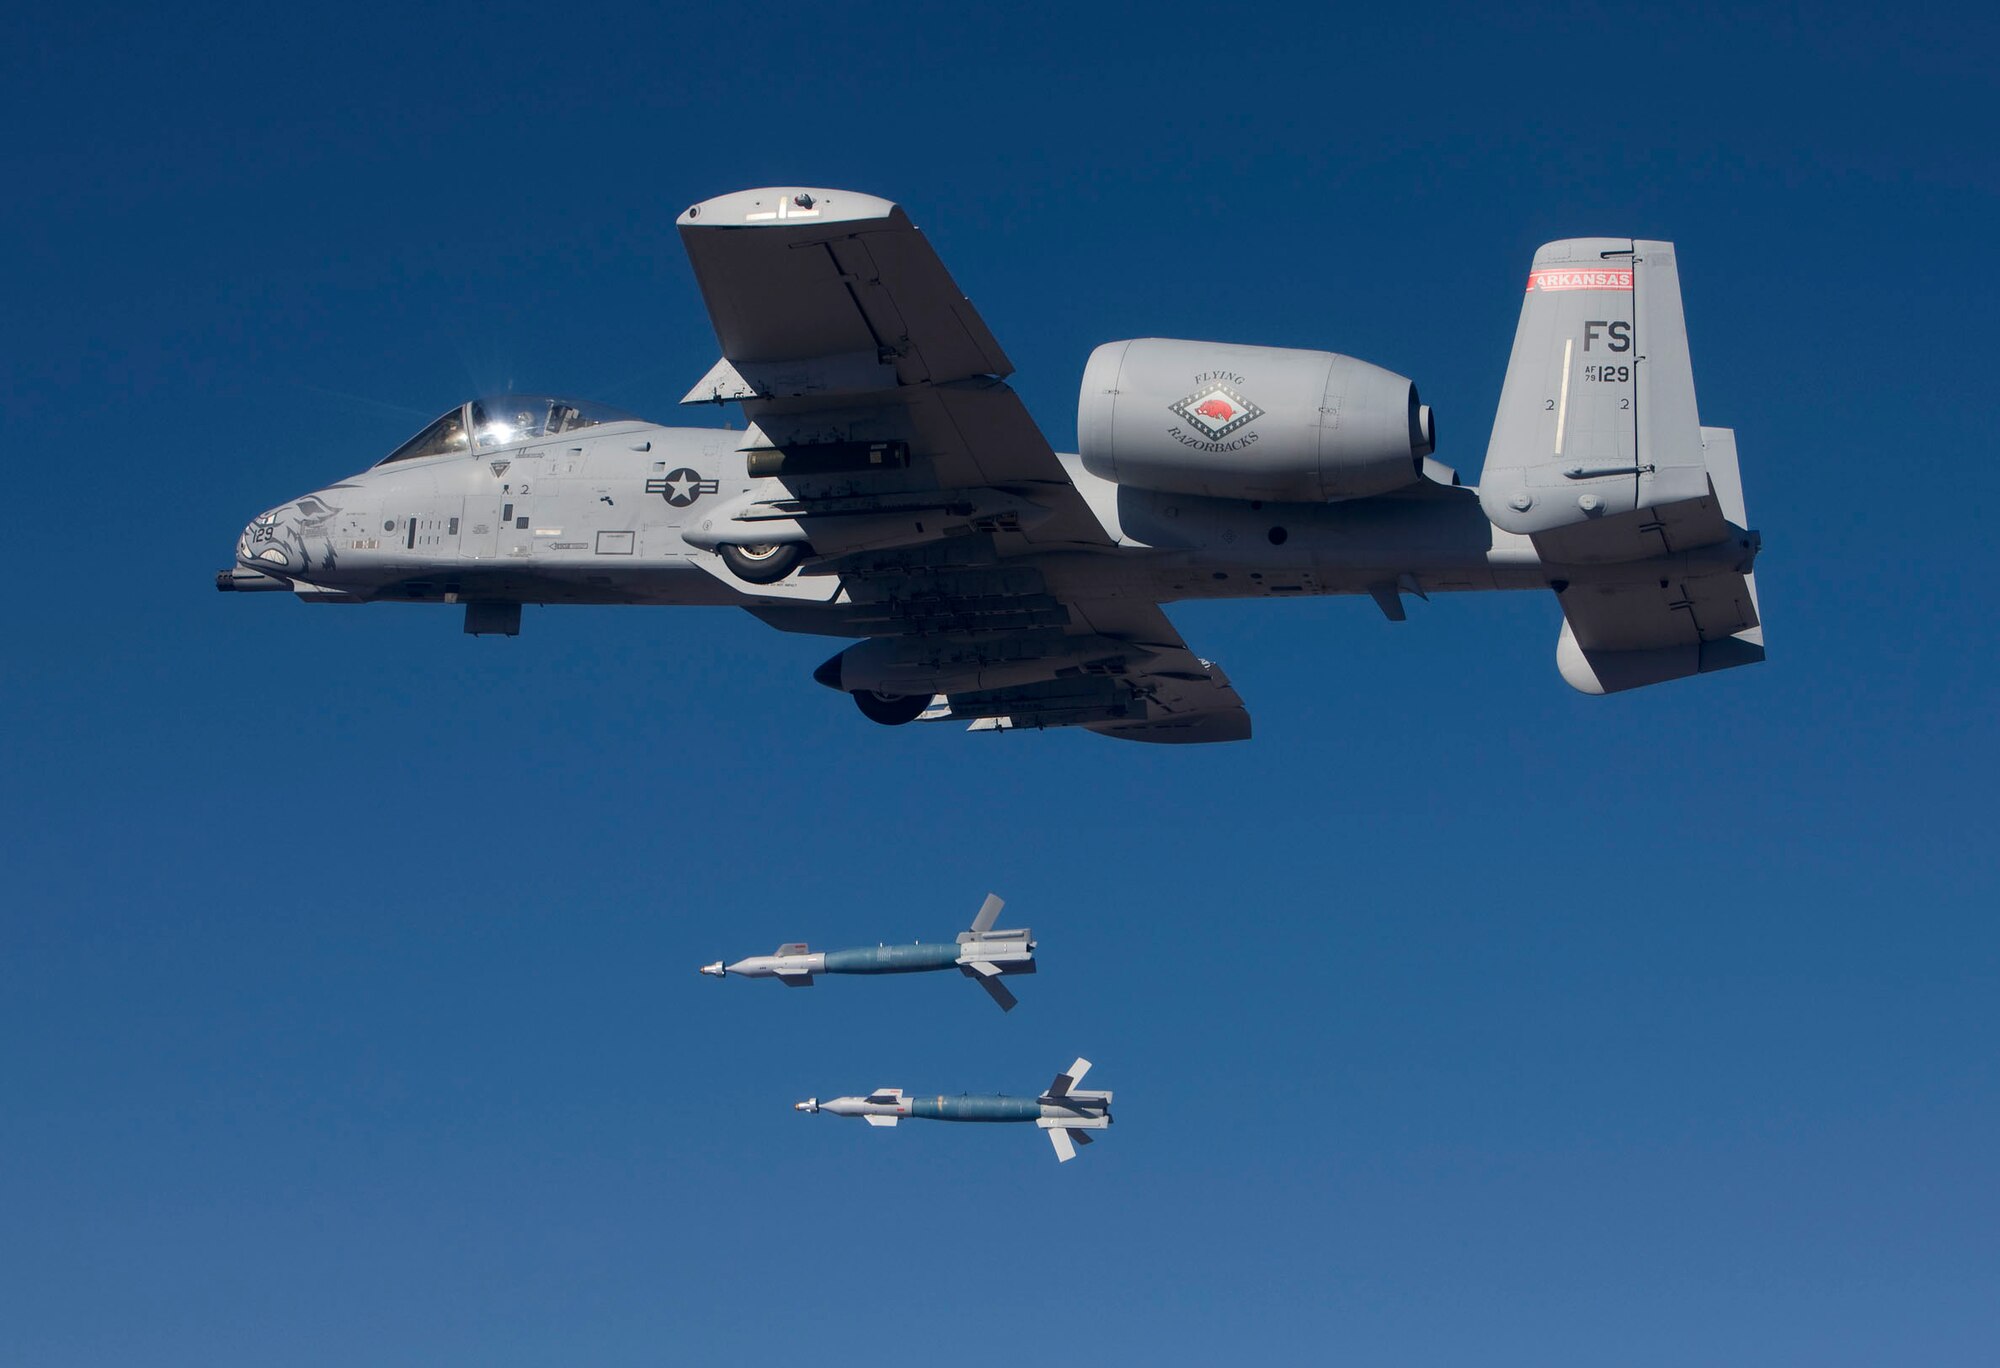 A-10C Thunderbolt II “Warthogs” with the 188th Fighter Wing, Arkansas Air National Guard conduct close-air support training near Davis-Monthan Air Force Base, Ariz. (Photo by Jim Haseltine)